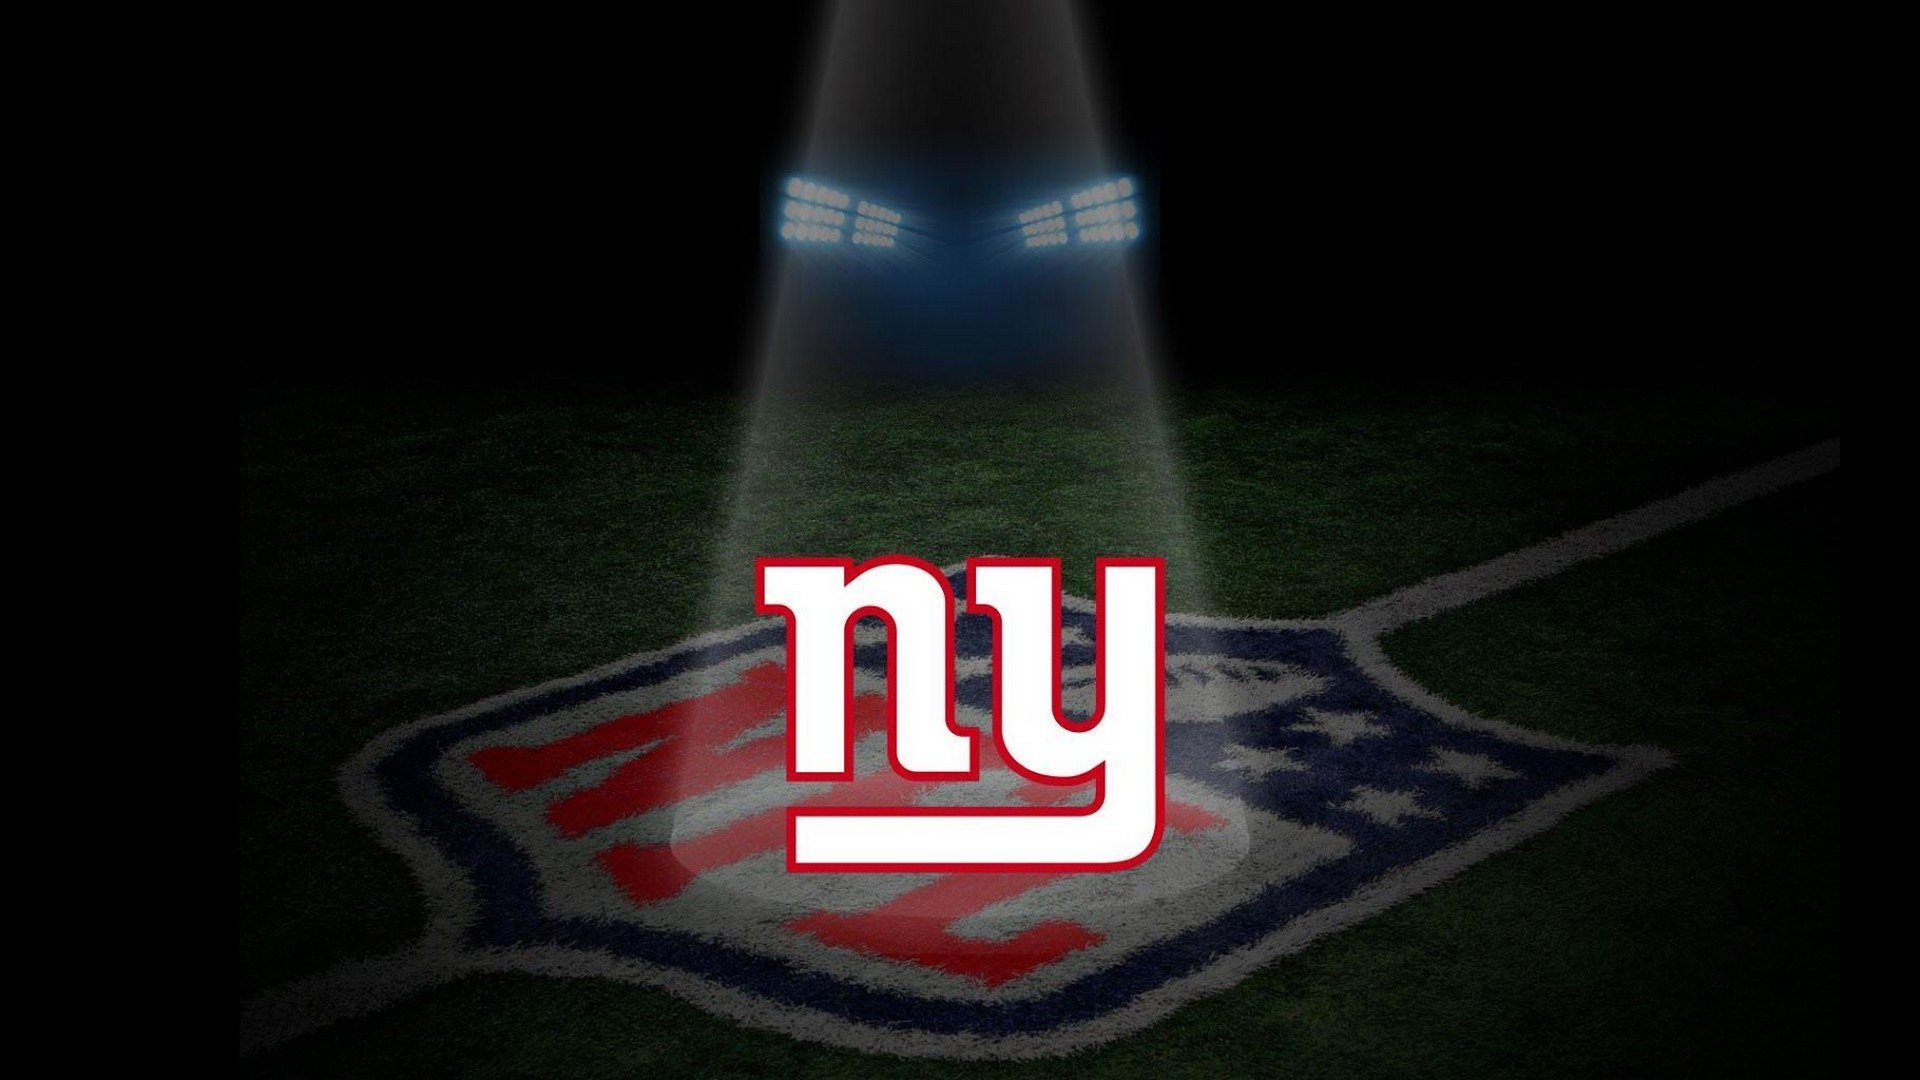 Wallpaper Desktop New York Giants NFL HD With high-resolution 1920X1080 pixel. You can use this wallpaper for your Mac or Windows Desktop Background, iPhone, Android or Tablet and another Smartphone device